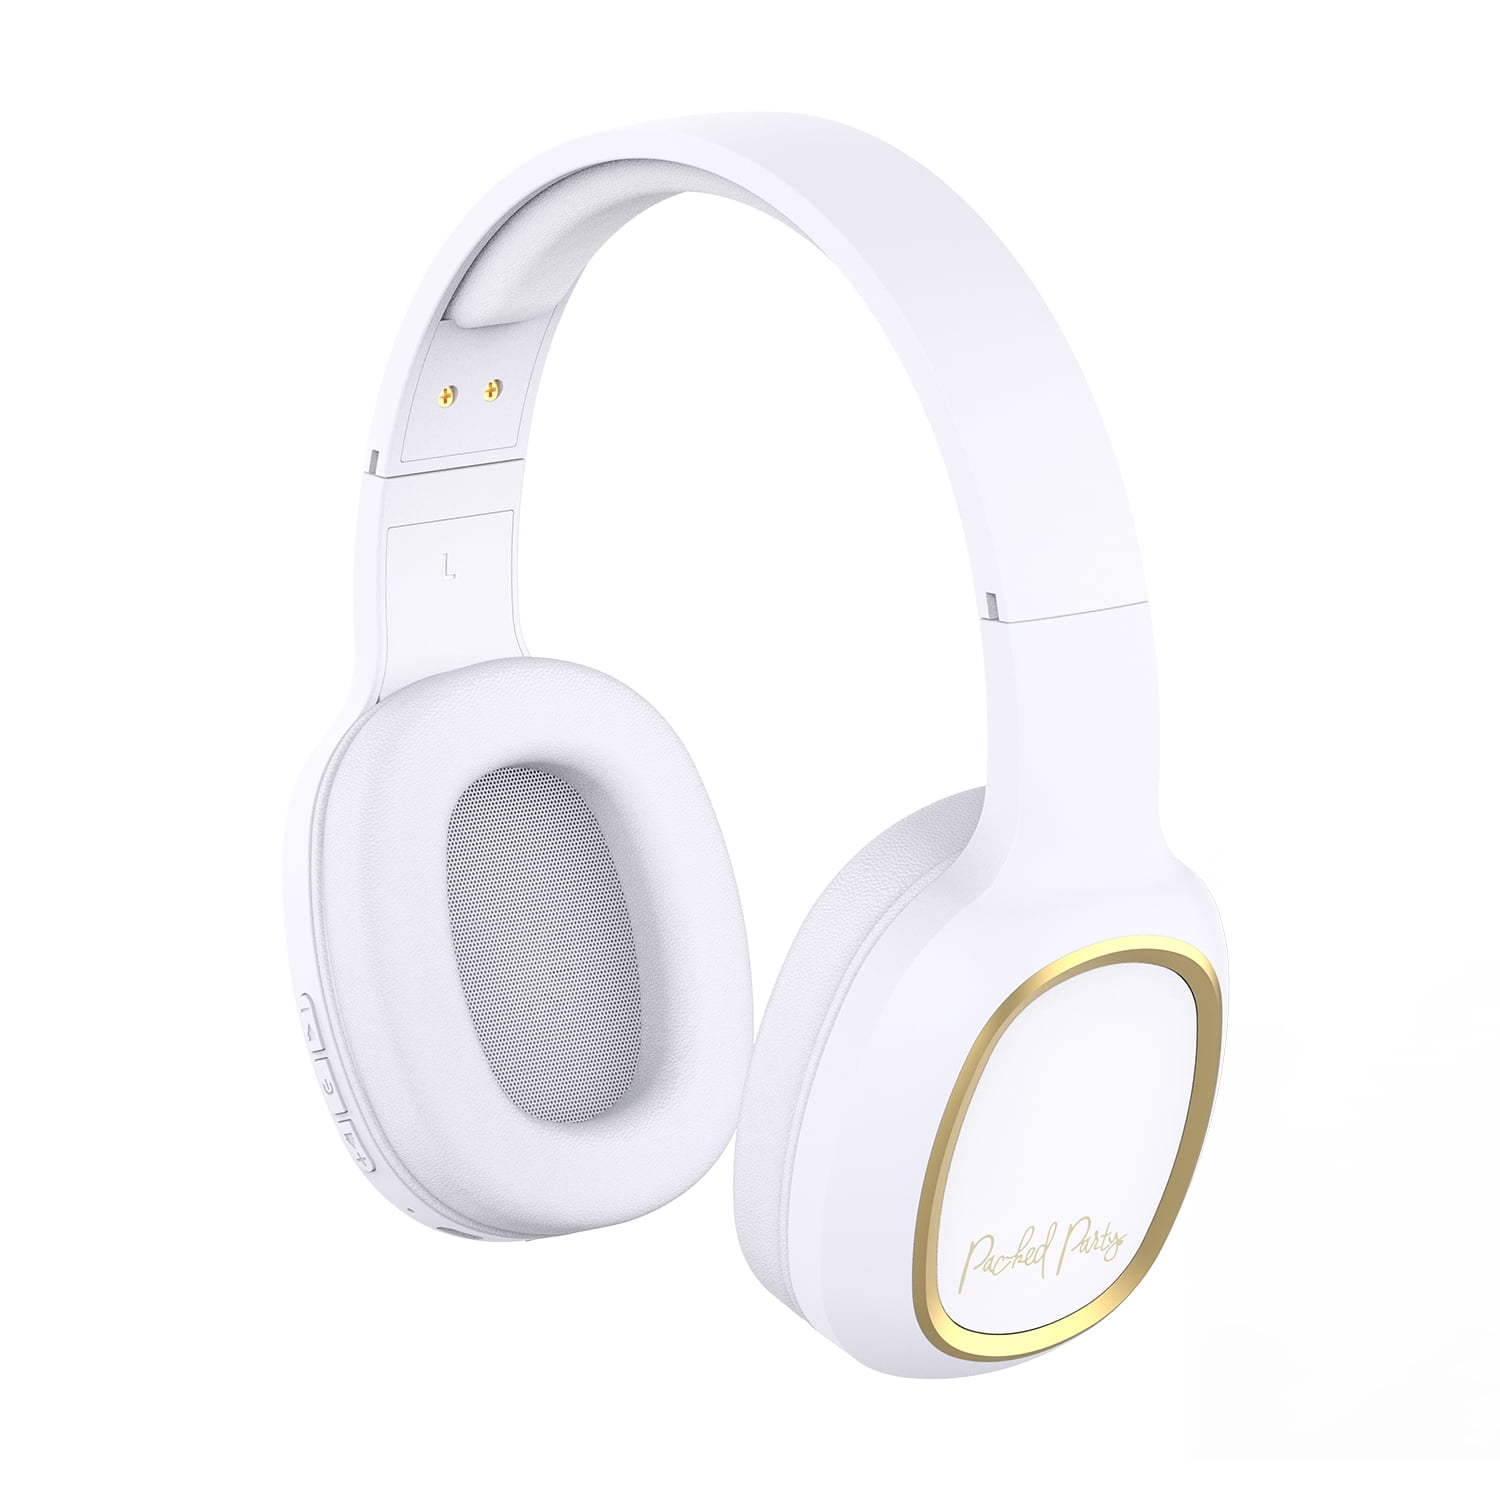 Packed Party "Good As Gold" Bluetooth Wireless Over-the-Ear Headphones